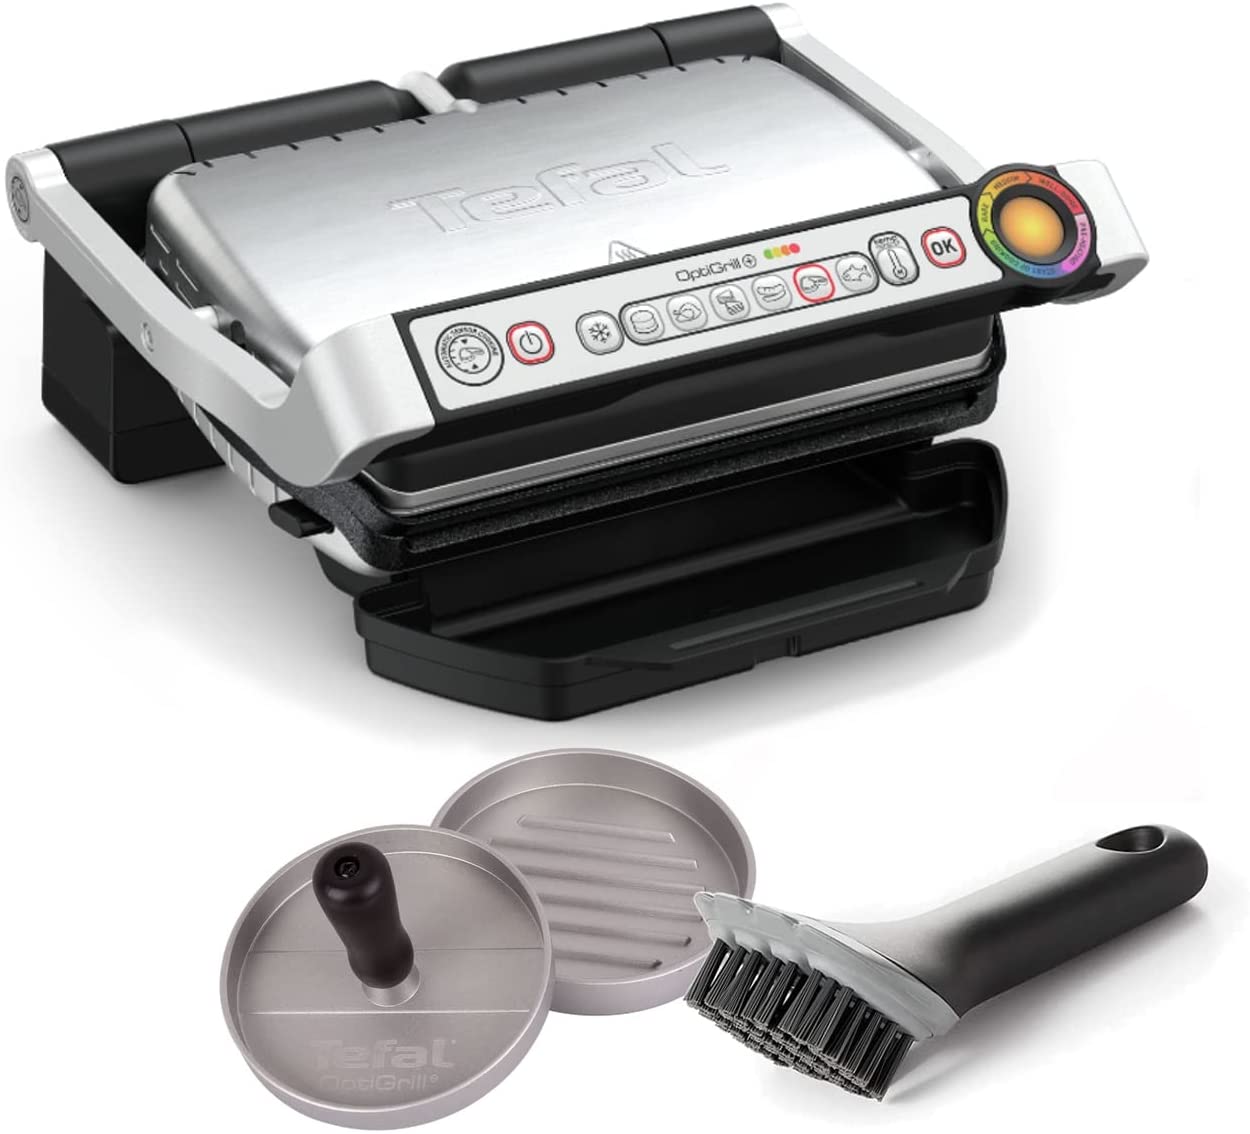 Tefal OptiGrill + Electric Contact Grill + Cleaning Grill Brush + Hamburger Press, 6 Grill Programmes, Indoor Electric Grill, Ideal Grill Results, Removable Non-Stick Cast Aluminium Plates, Stainless Steel